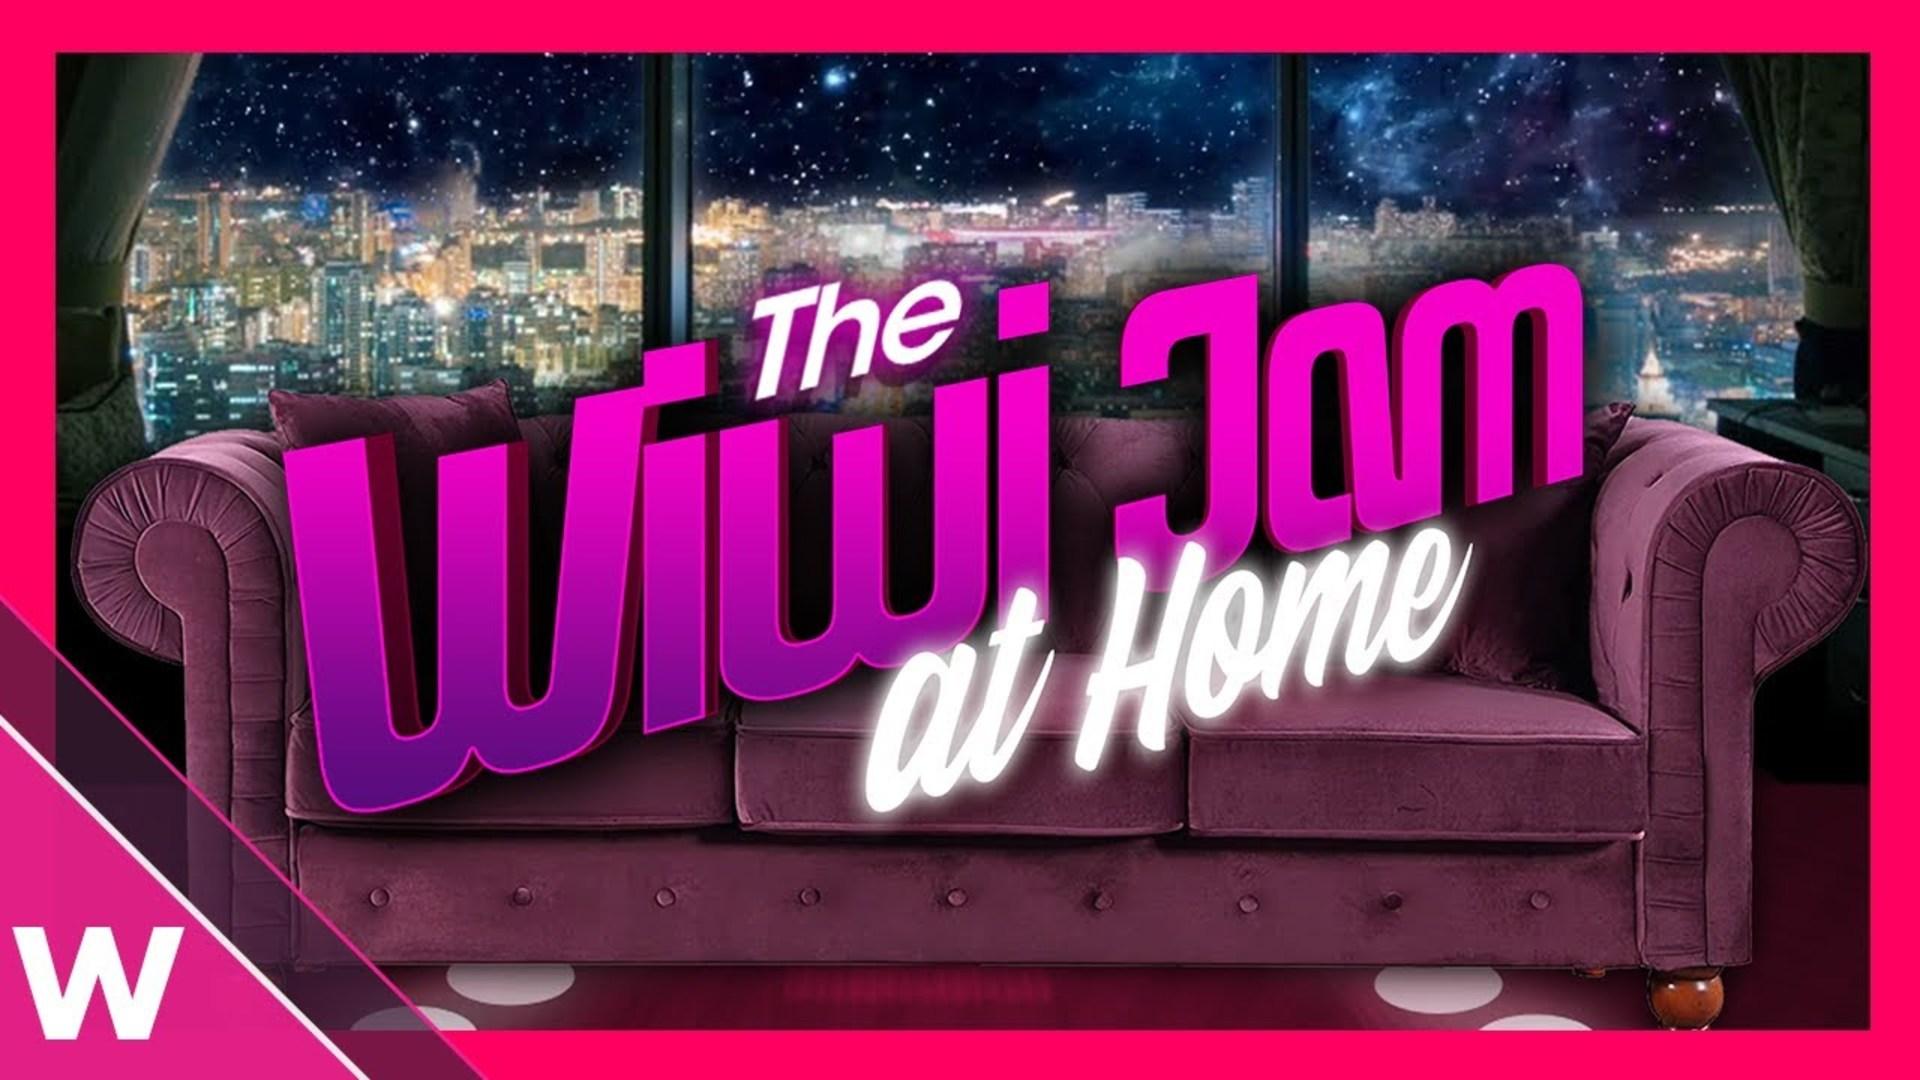 Eurovision: The Wiwi Jam at Home 2020